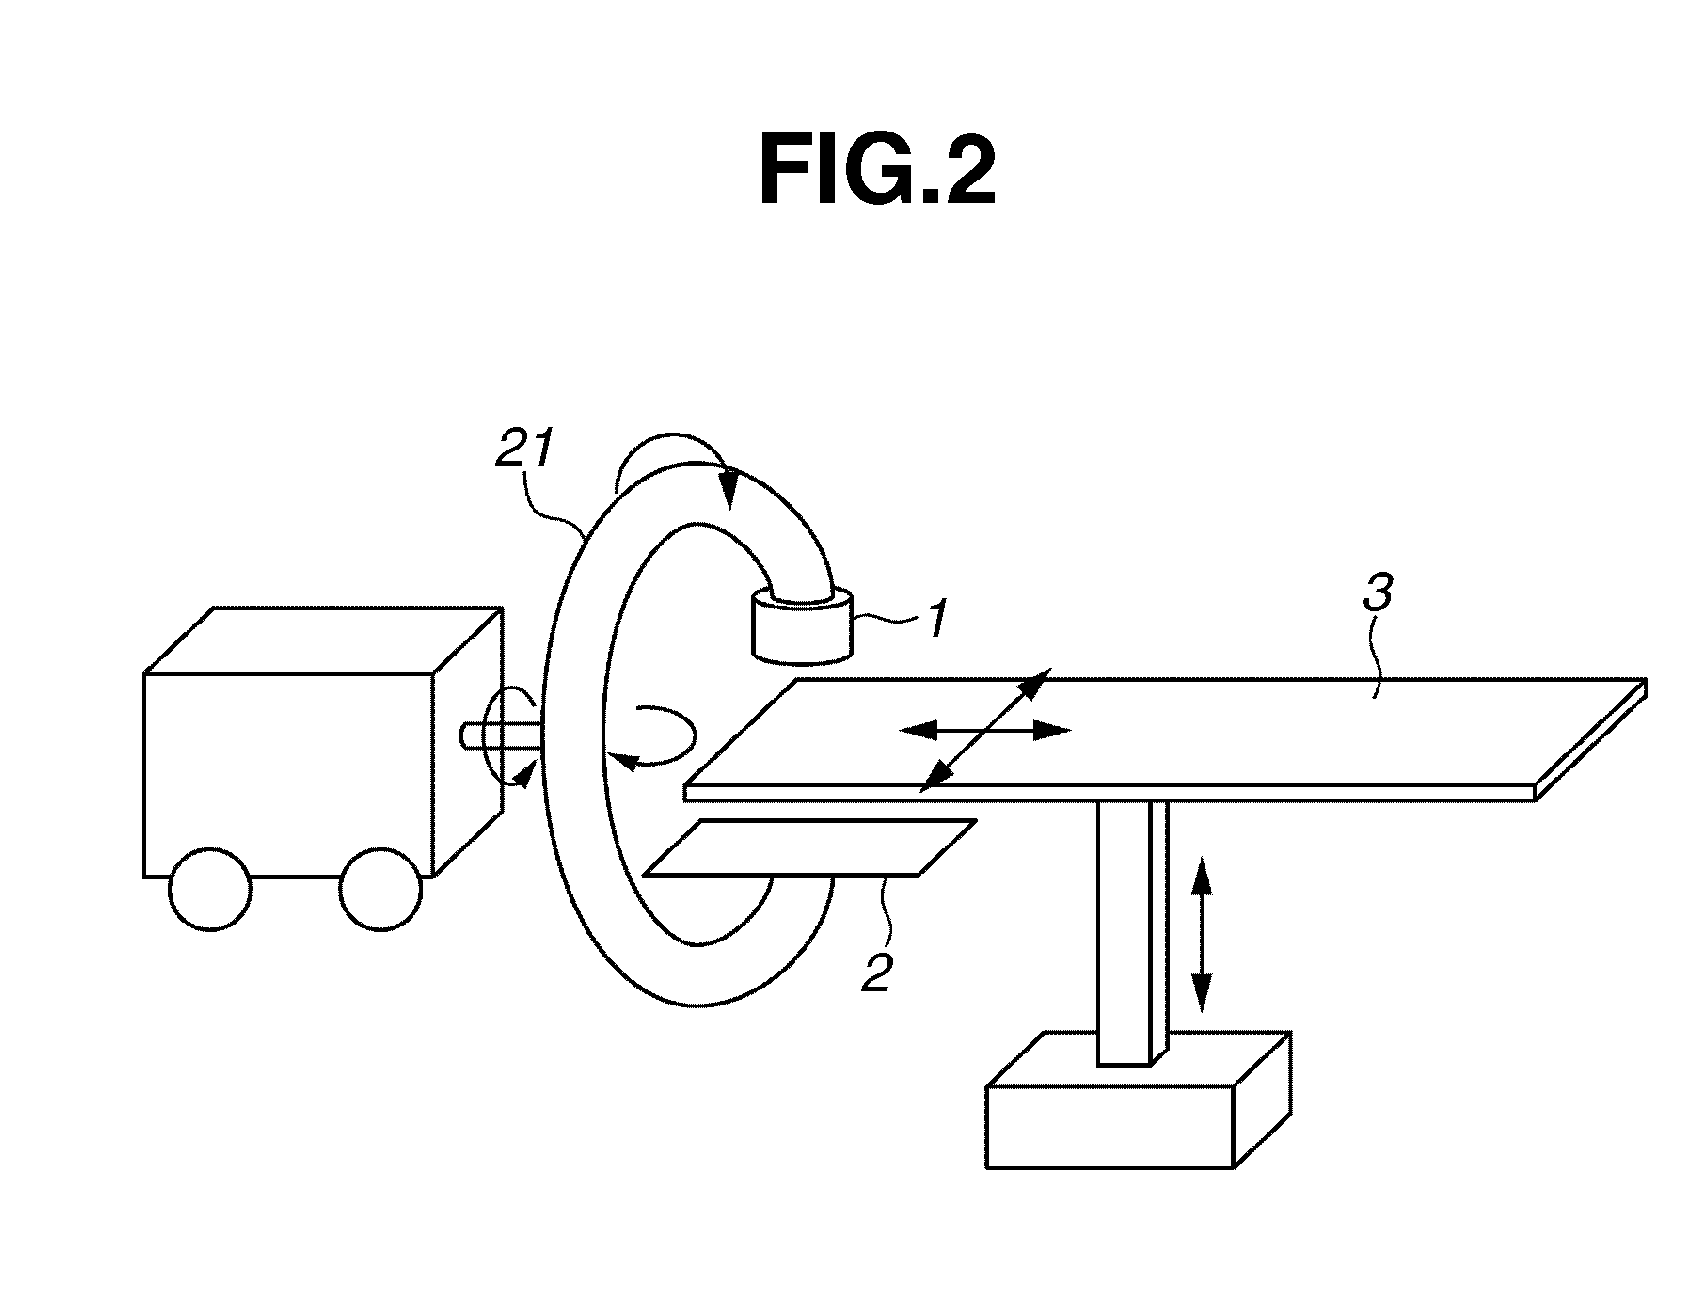 X-ray image processing apparatus and method